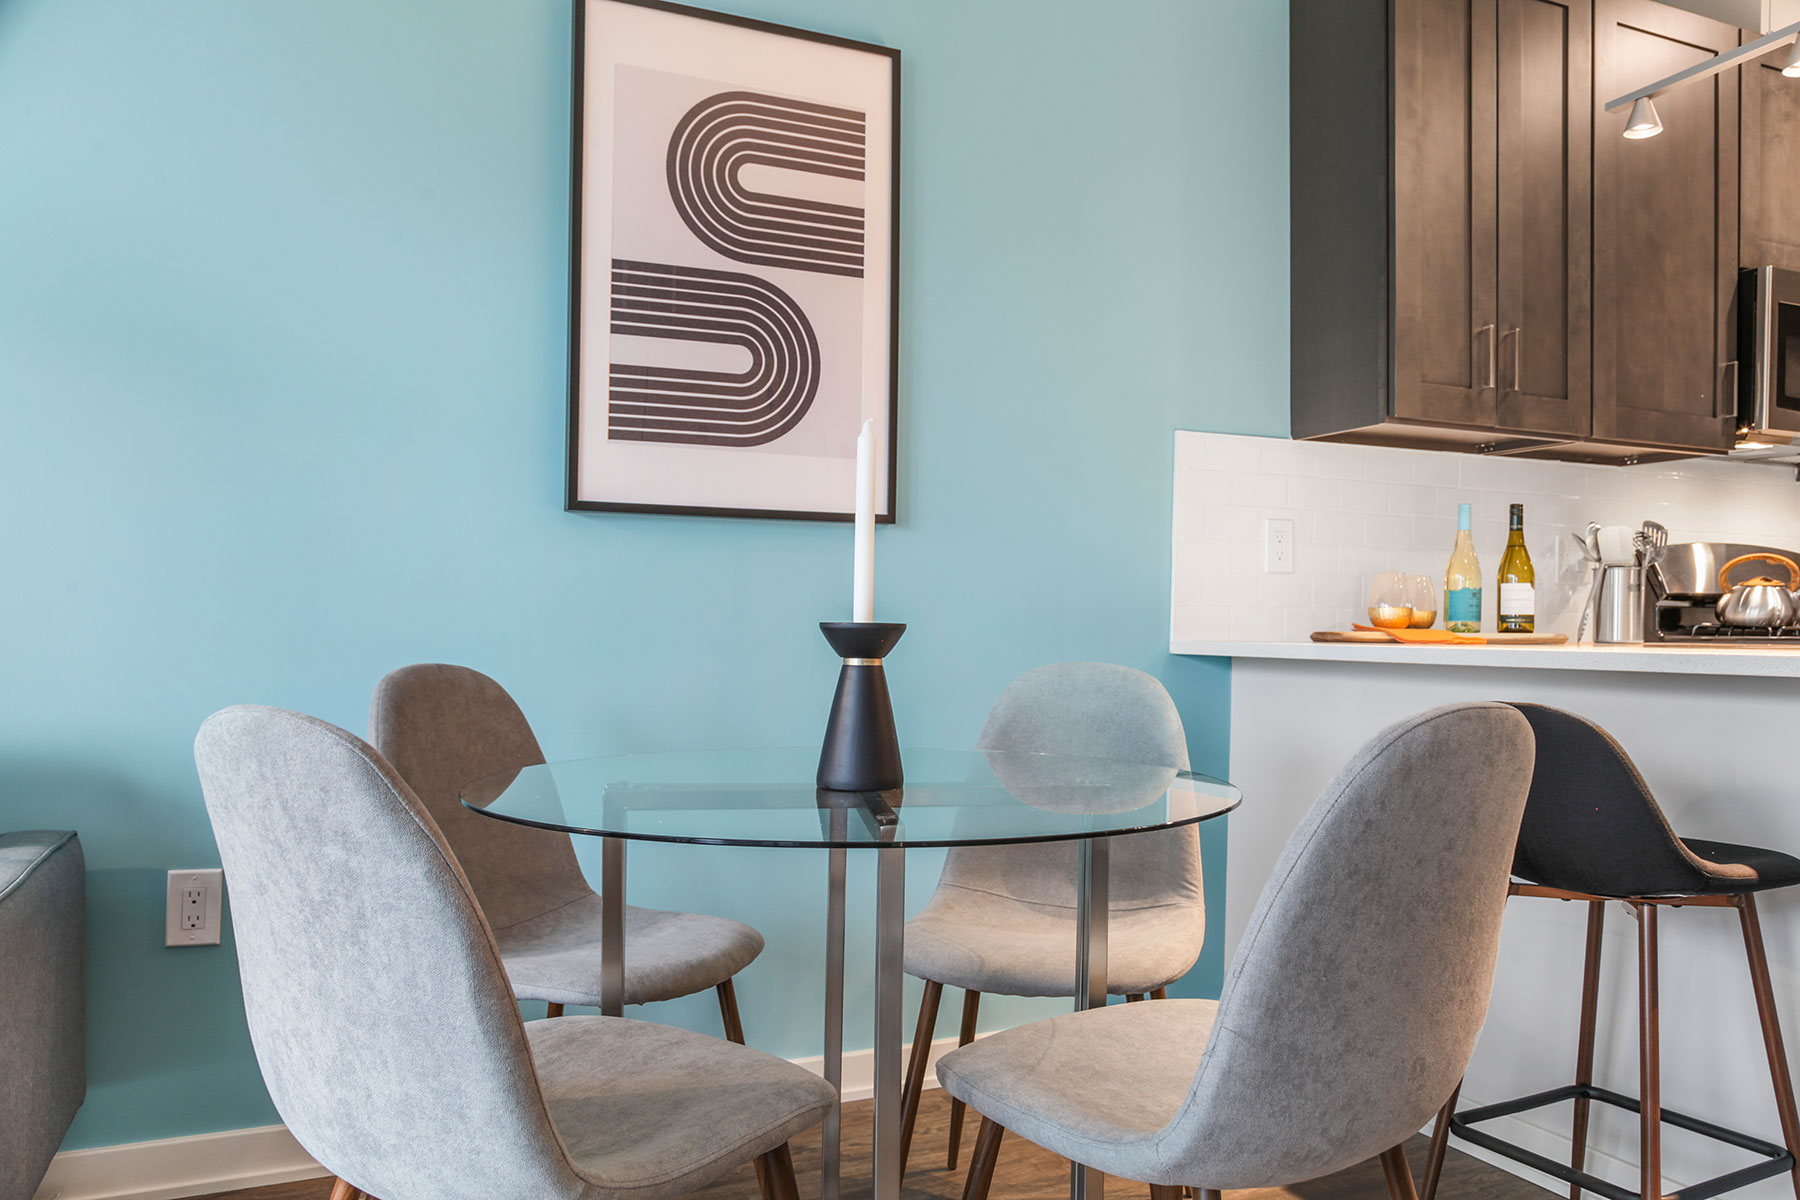 Detail of eat in glass table with 4 chairs near kitchen, light teal accent wall and wood floors